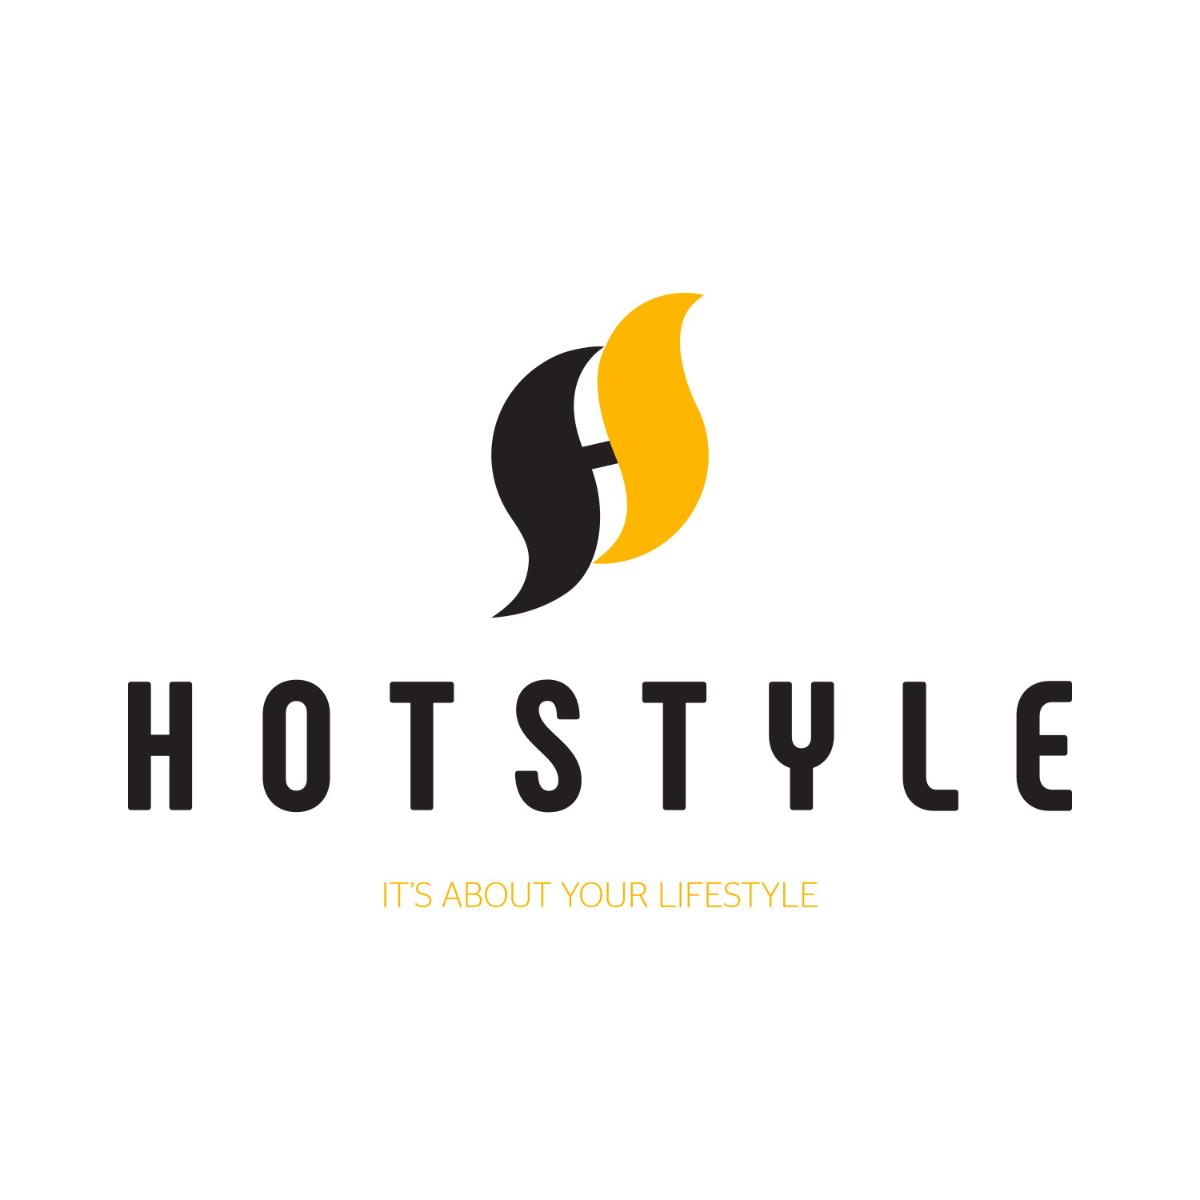 hotstyle.gr